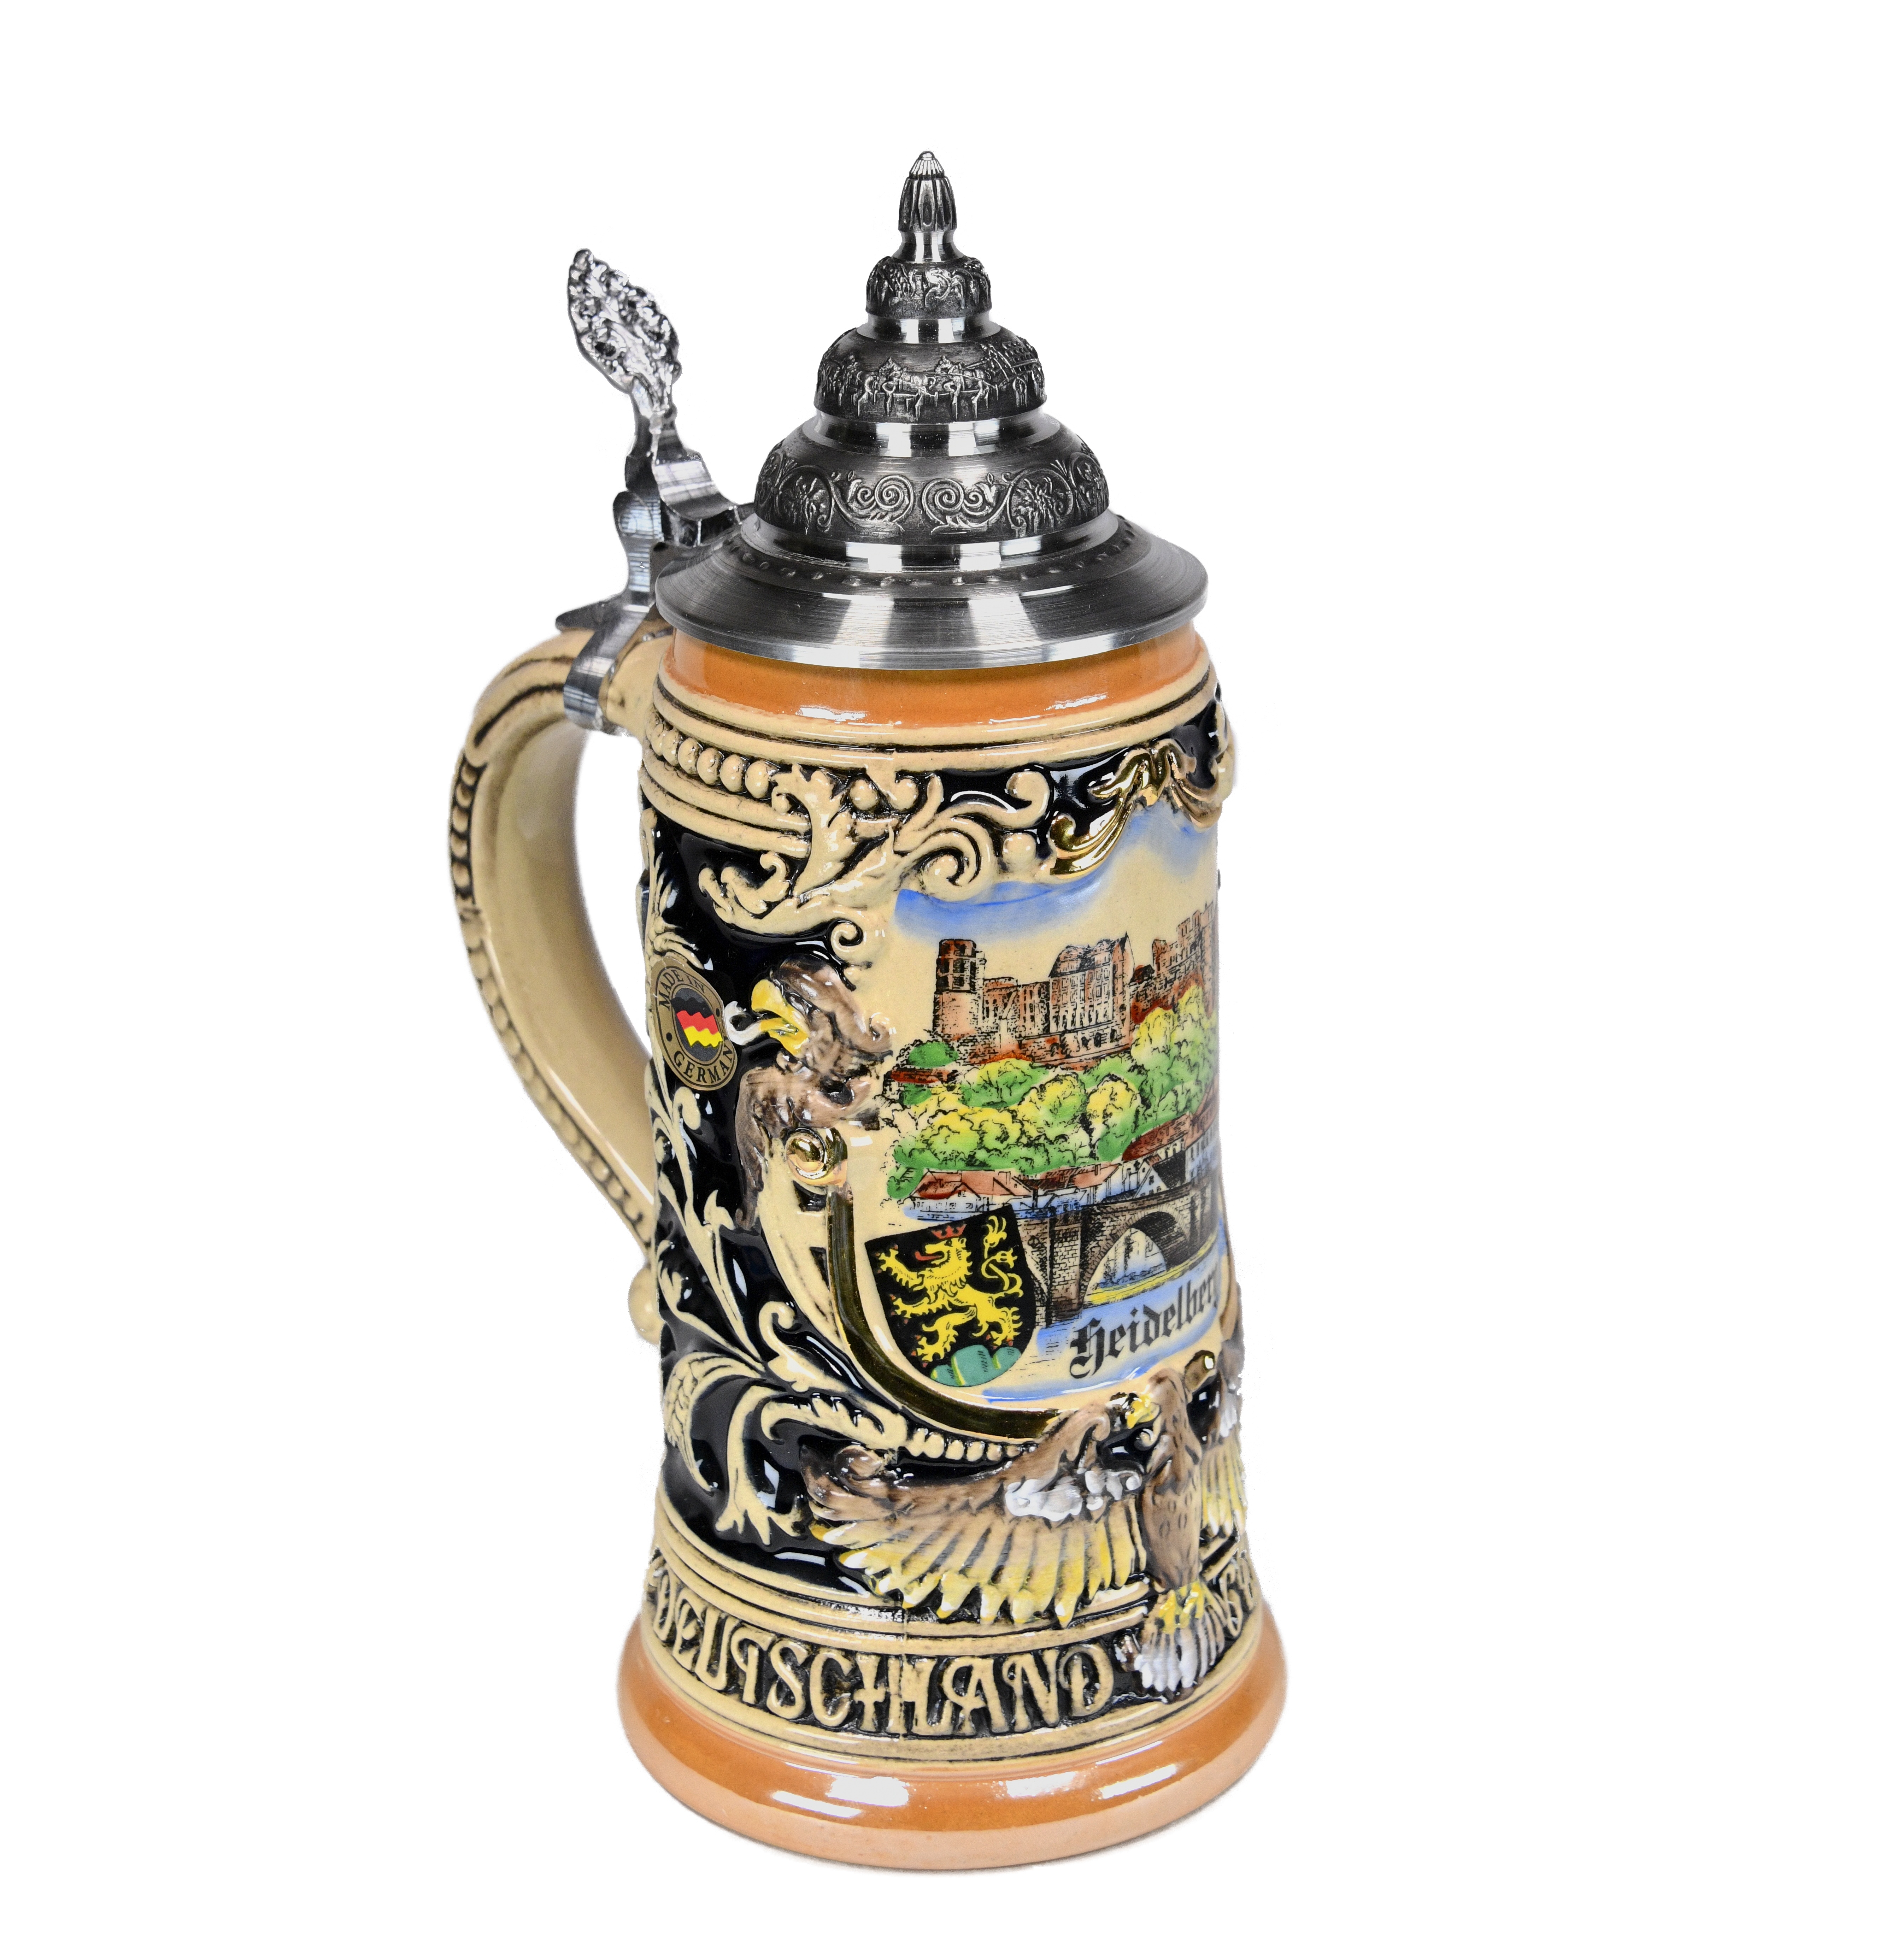 Beer stein by King - Heidelberg City Skyline Relief Authentic German Beer Stein 0.4l Limited Edition - image 4 of 6